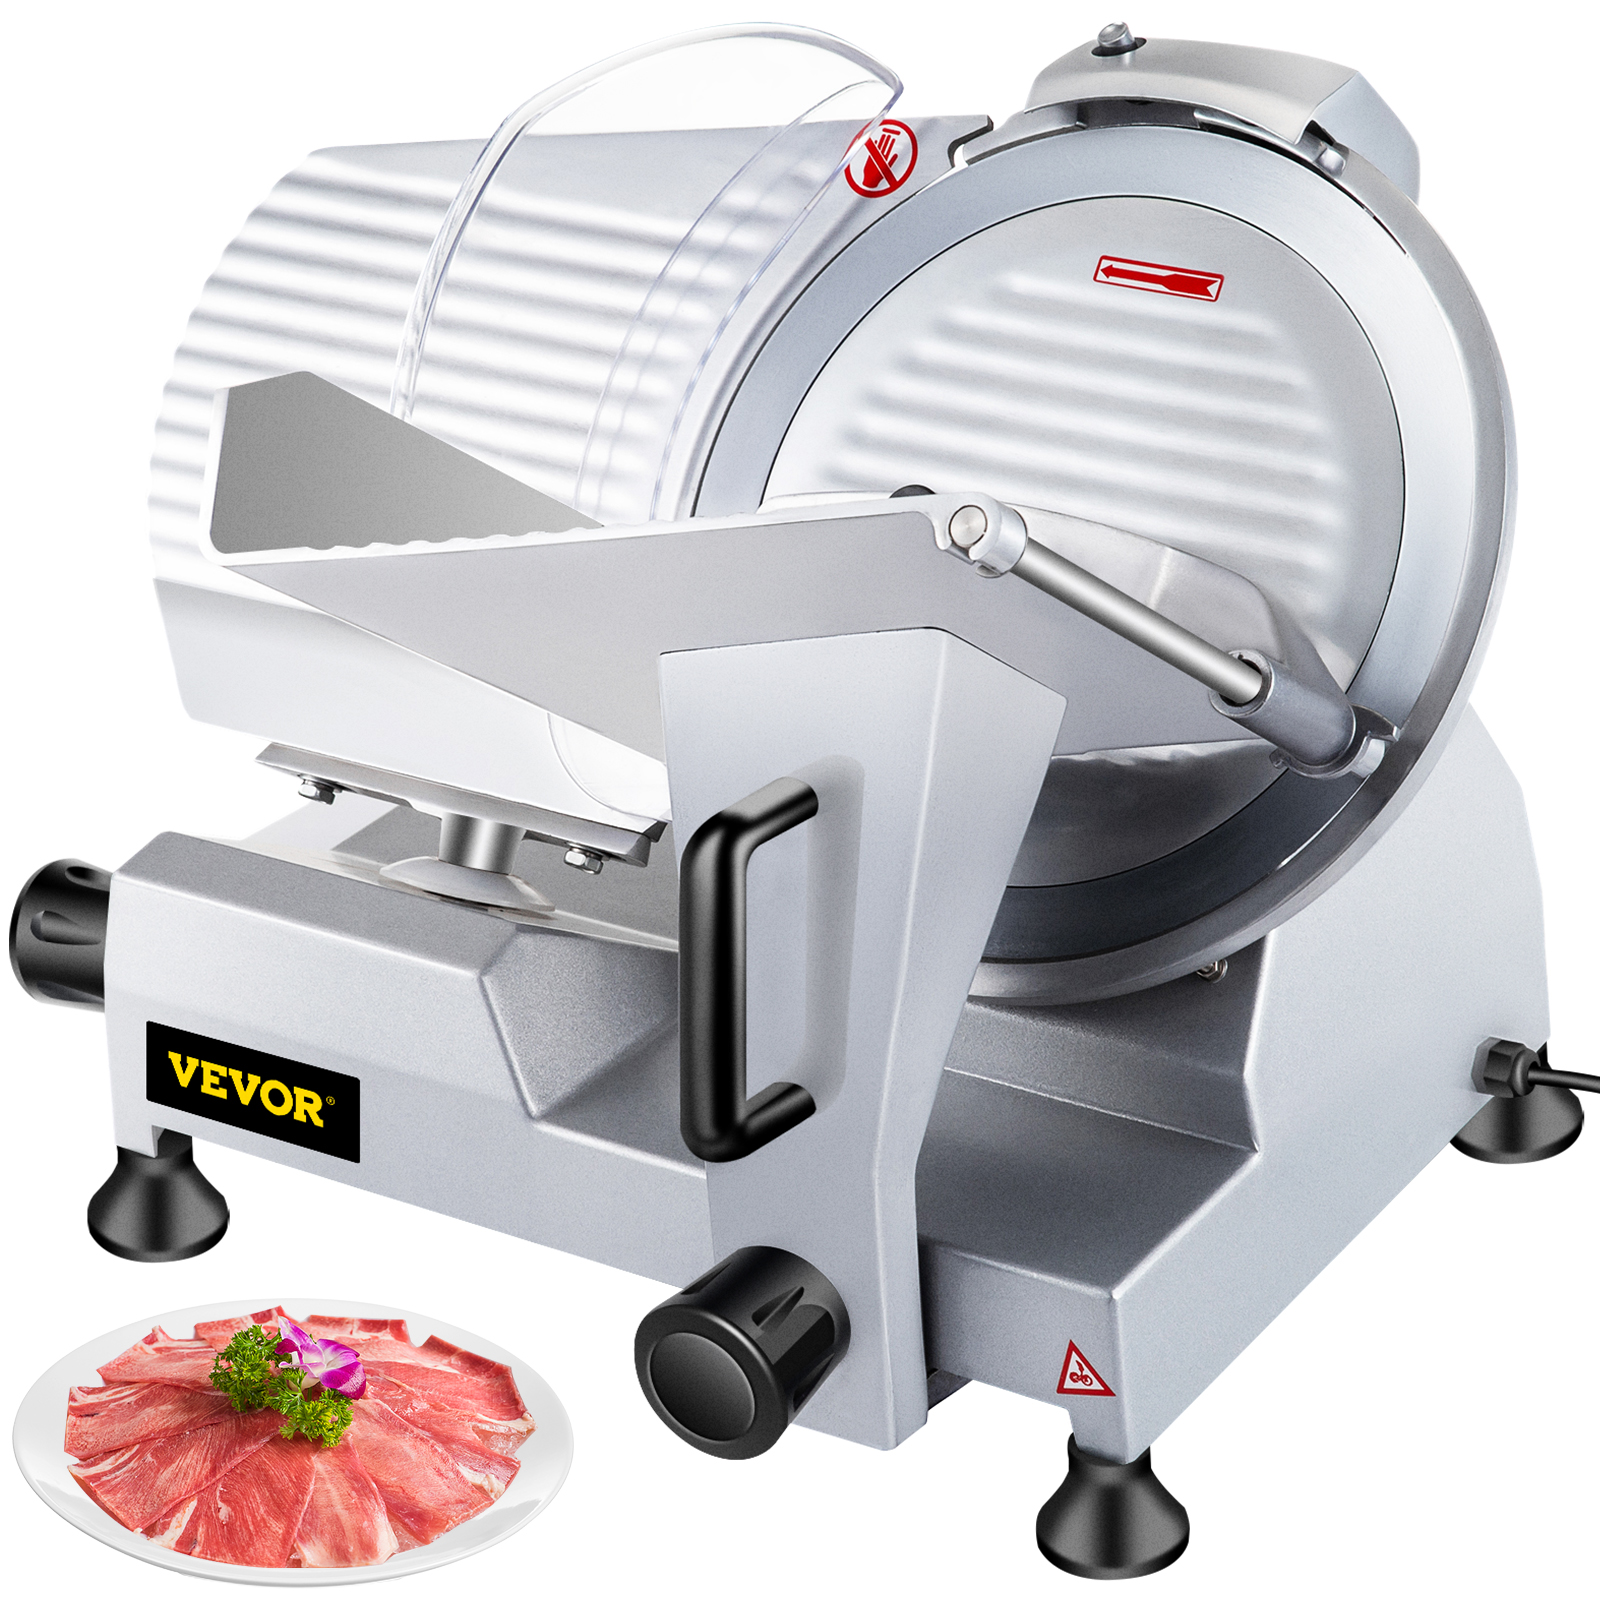 Ham Maker Stainless Steel Healthy Homemade Deli Meat Press Bacon